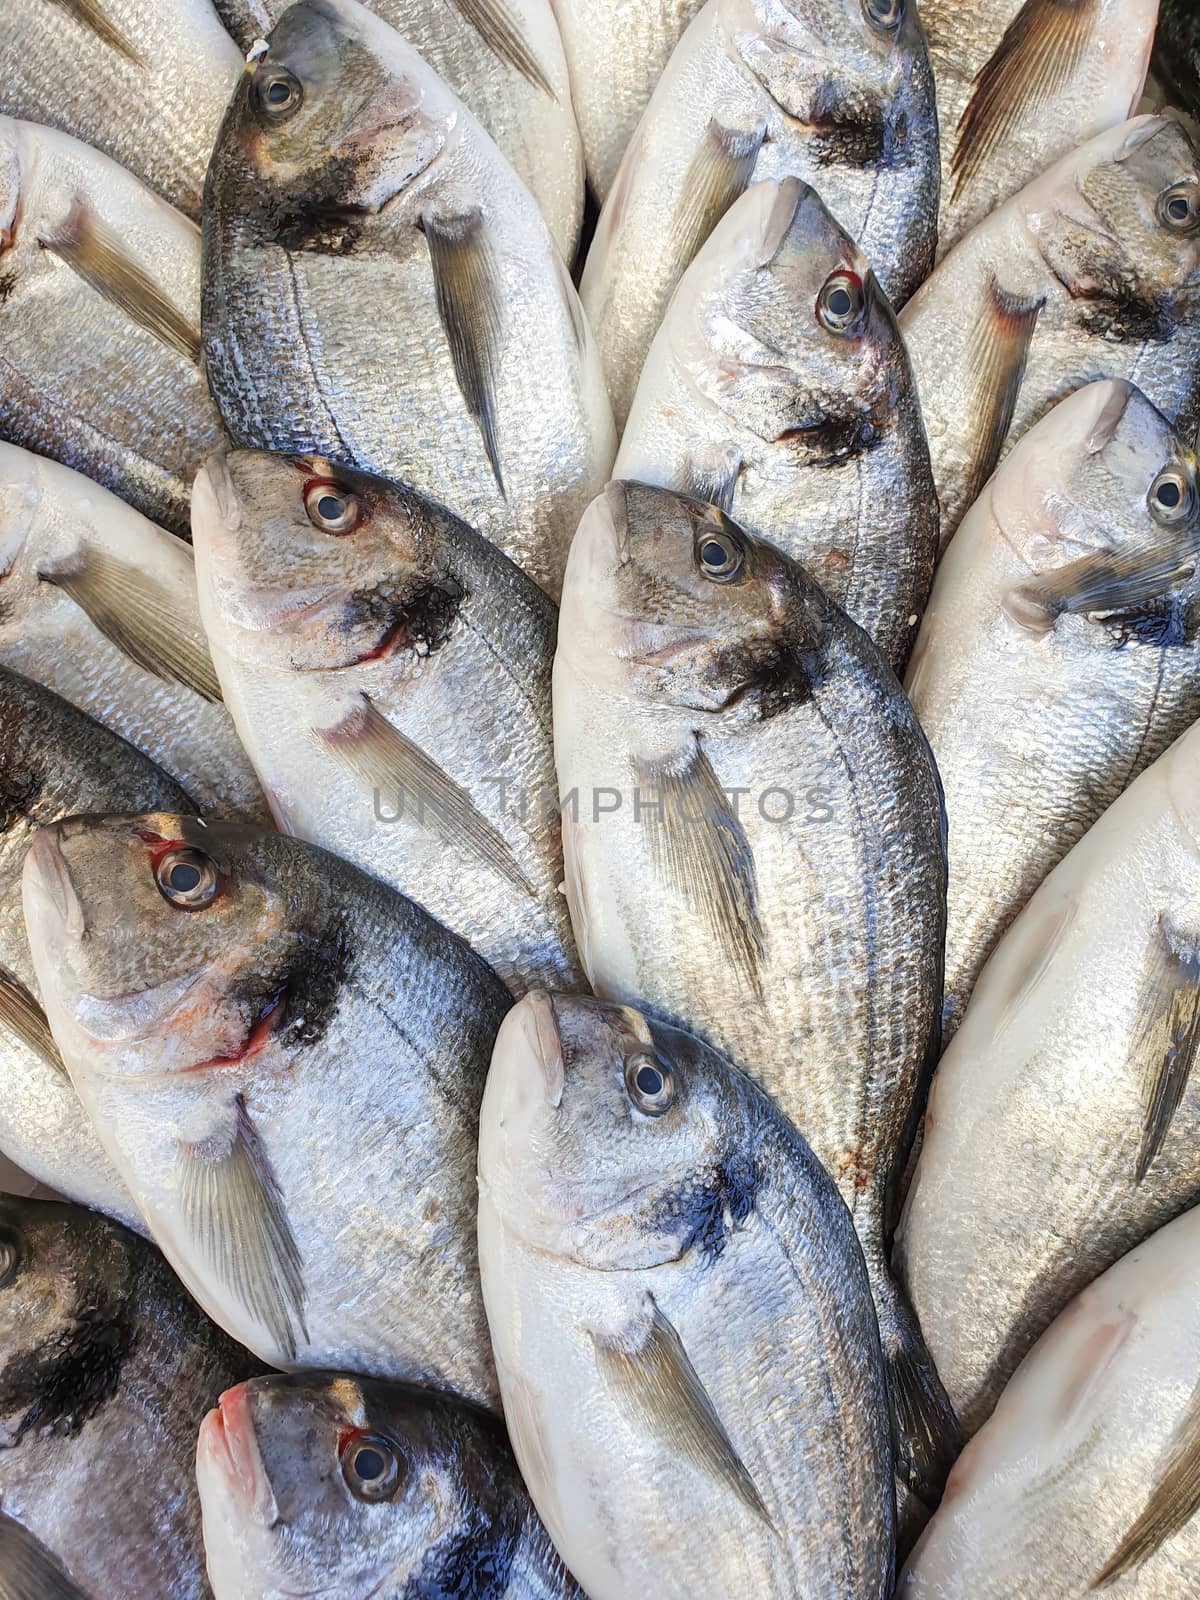 Many bream fish on ice for sale, Fish local market stall with fresh seafood,view from top.